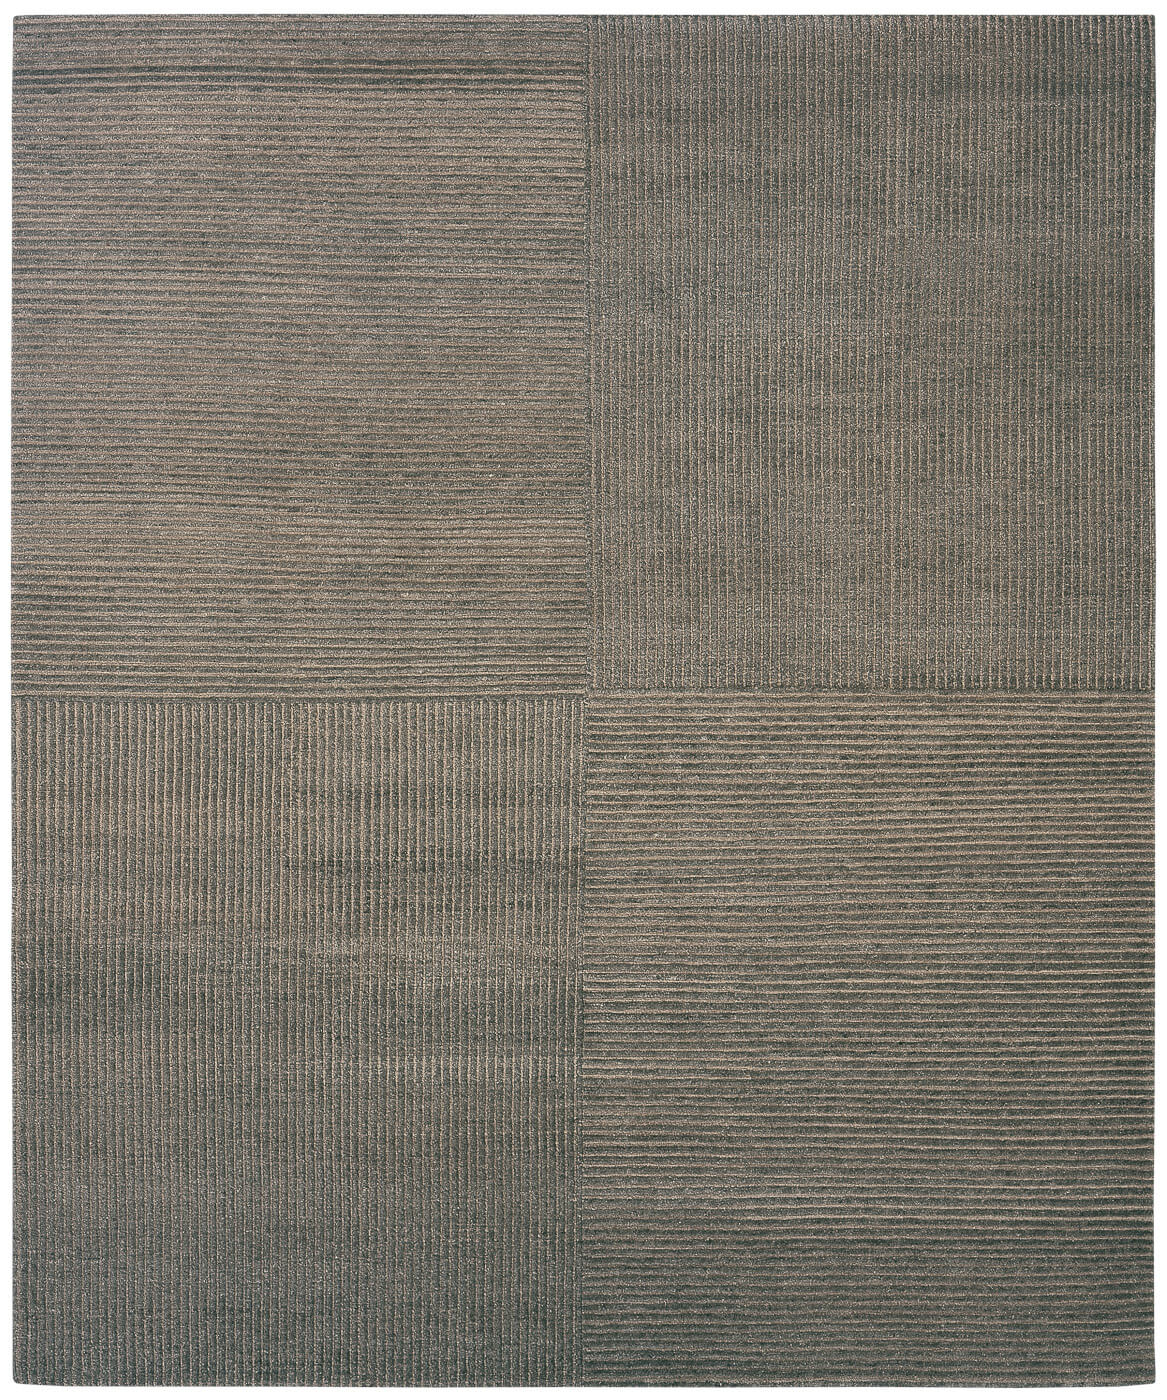 Hand-woven Brown Luxury Rug ☞ Size: 200 x 300 cm